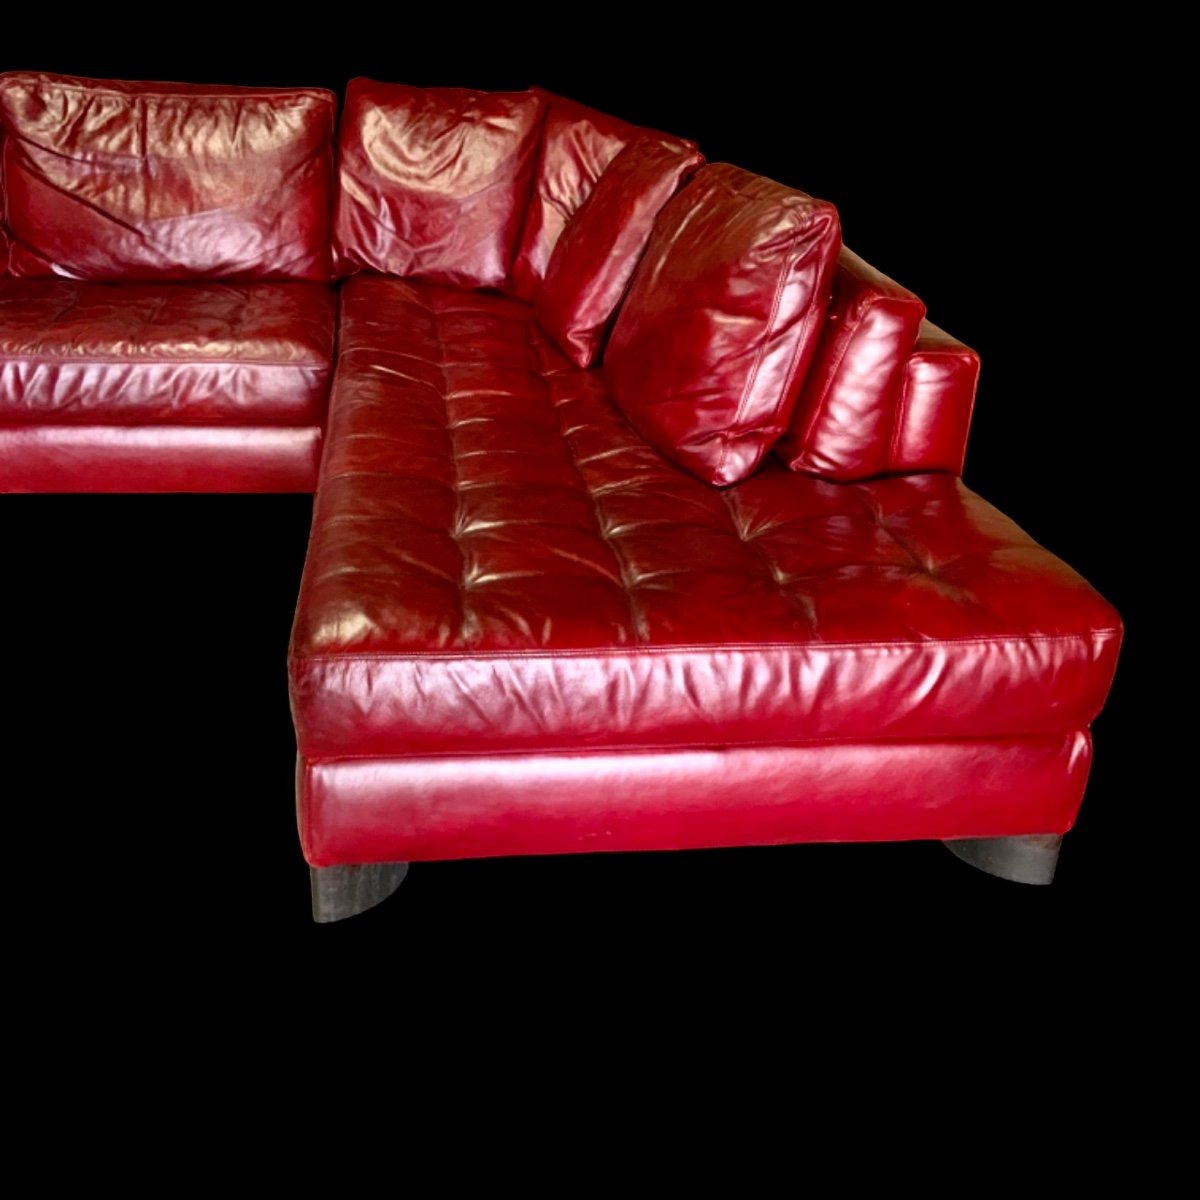 Natuzzi Corner Sofa In Red Leather From The 1980s/90s-photo-2